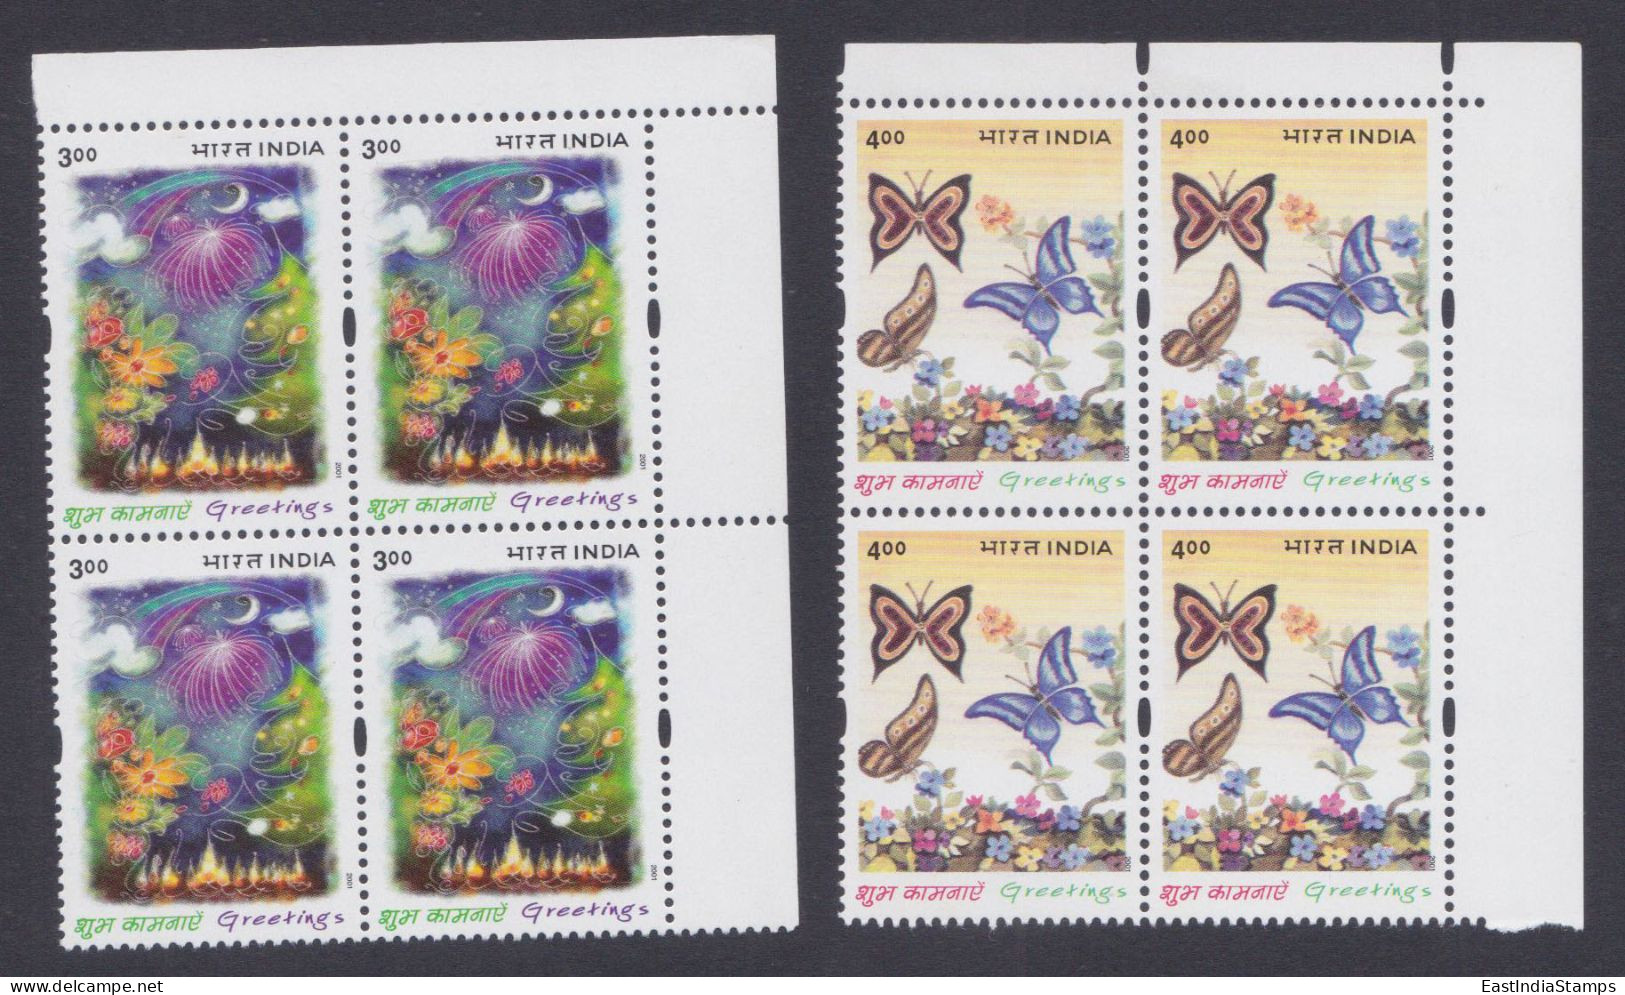 Inde India 2001 MNH Greetings, Butterfly, Butterflies, Flower, Flowers, Stars, Lights, Festivals, Block - Unused Stamps